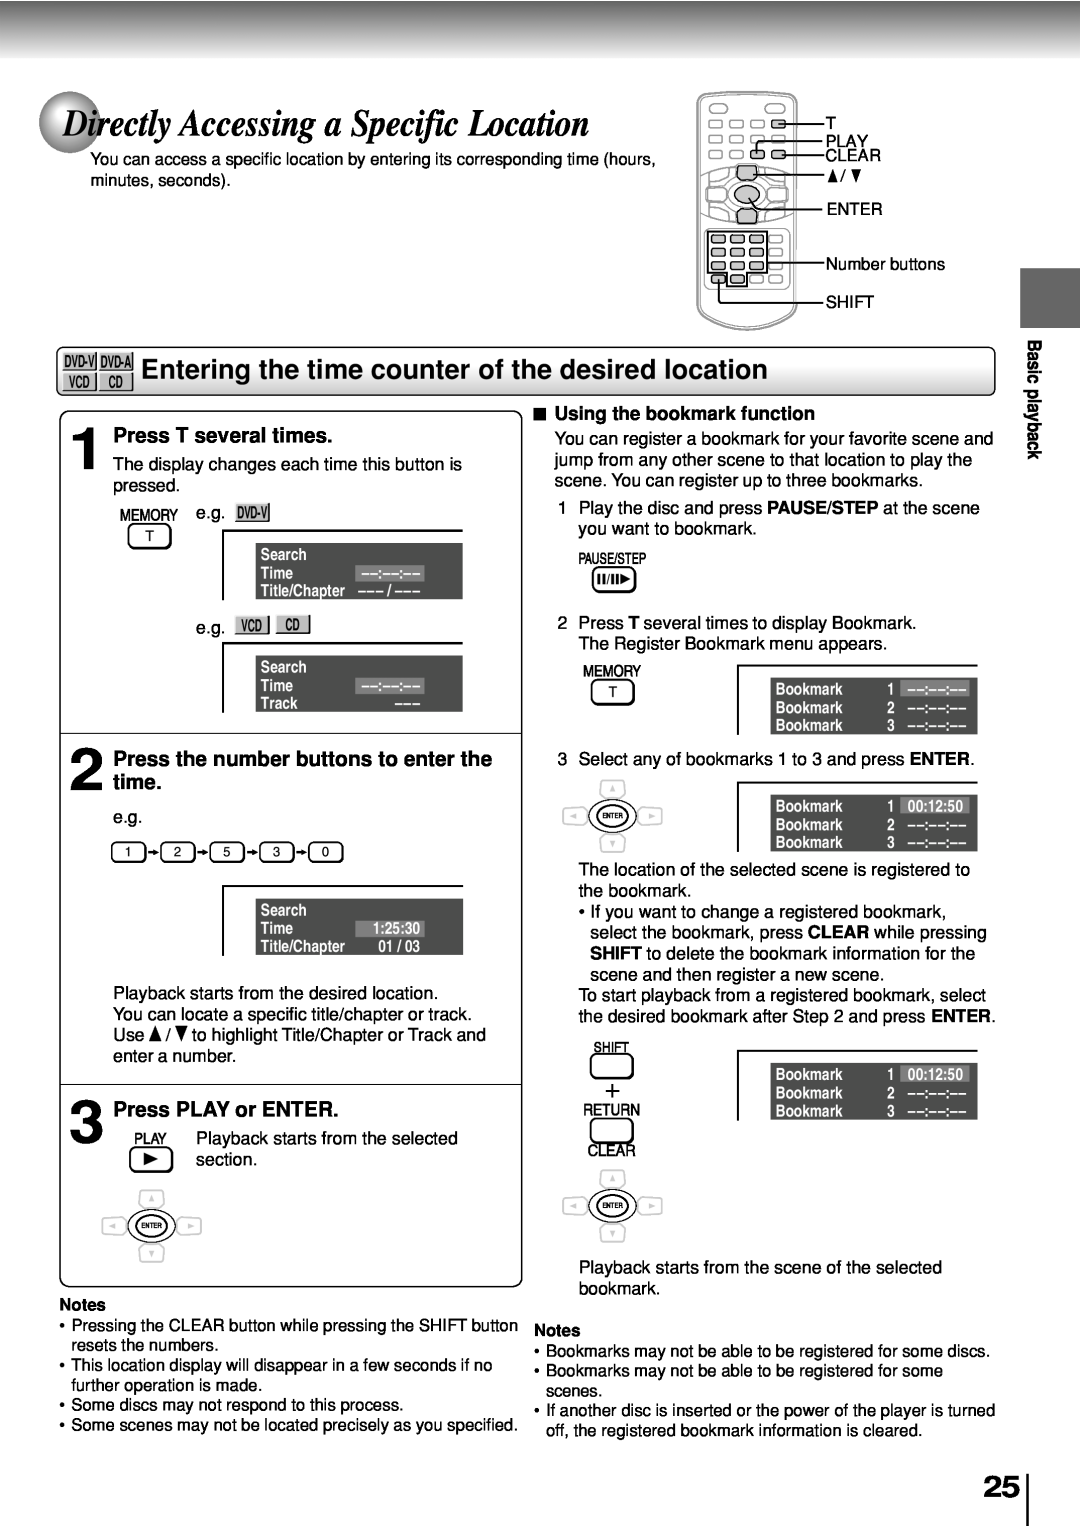 Toshiba SD-P2800SE owner manual Directly Accessing a Specific Location, Entering the time counter of the desired location 